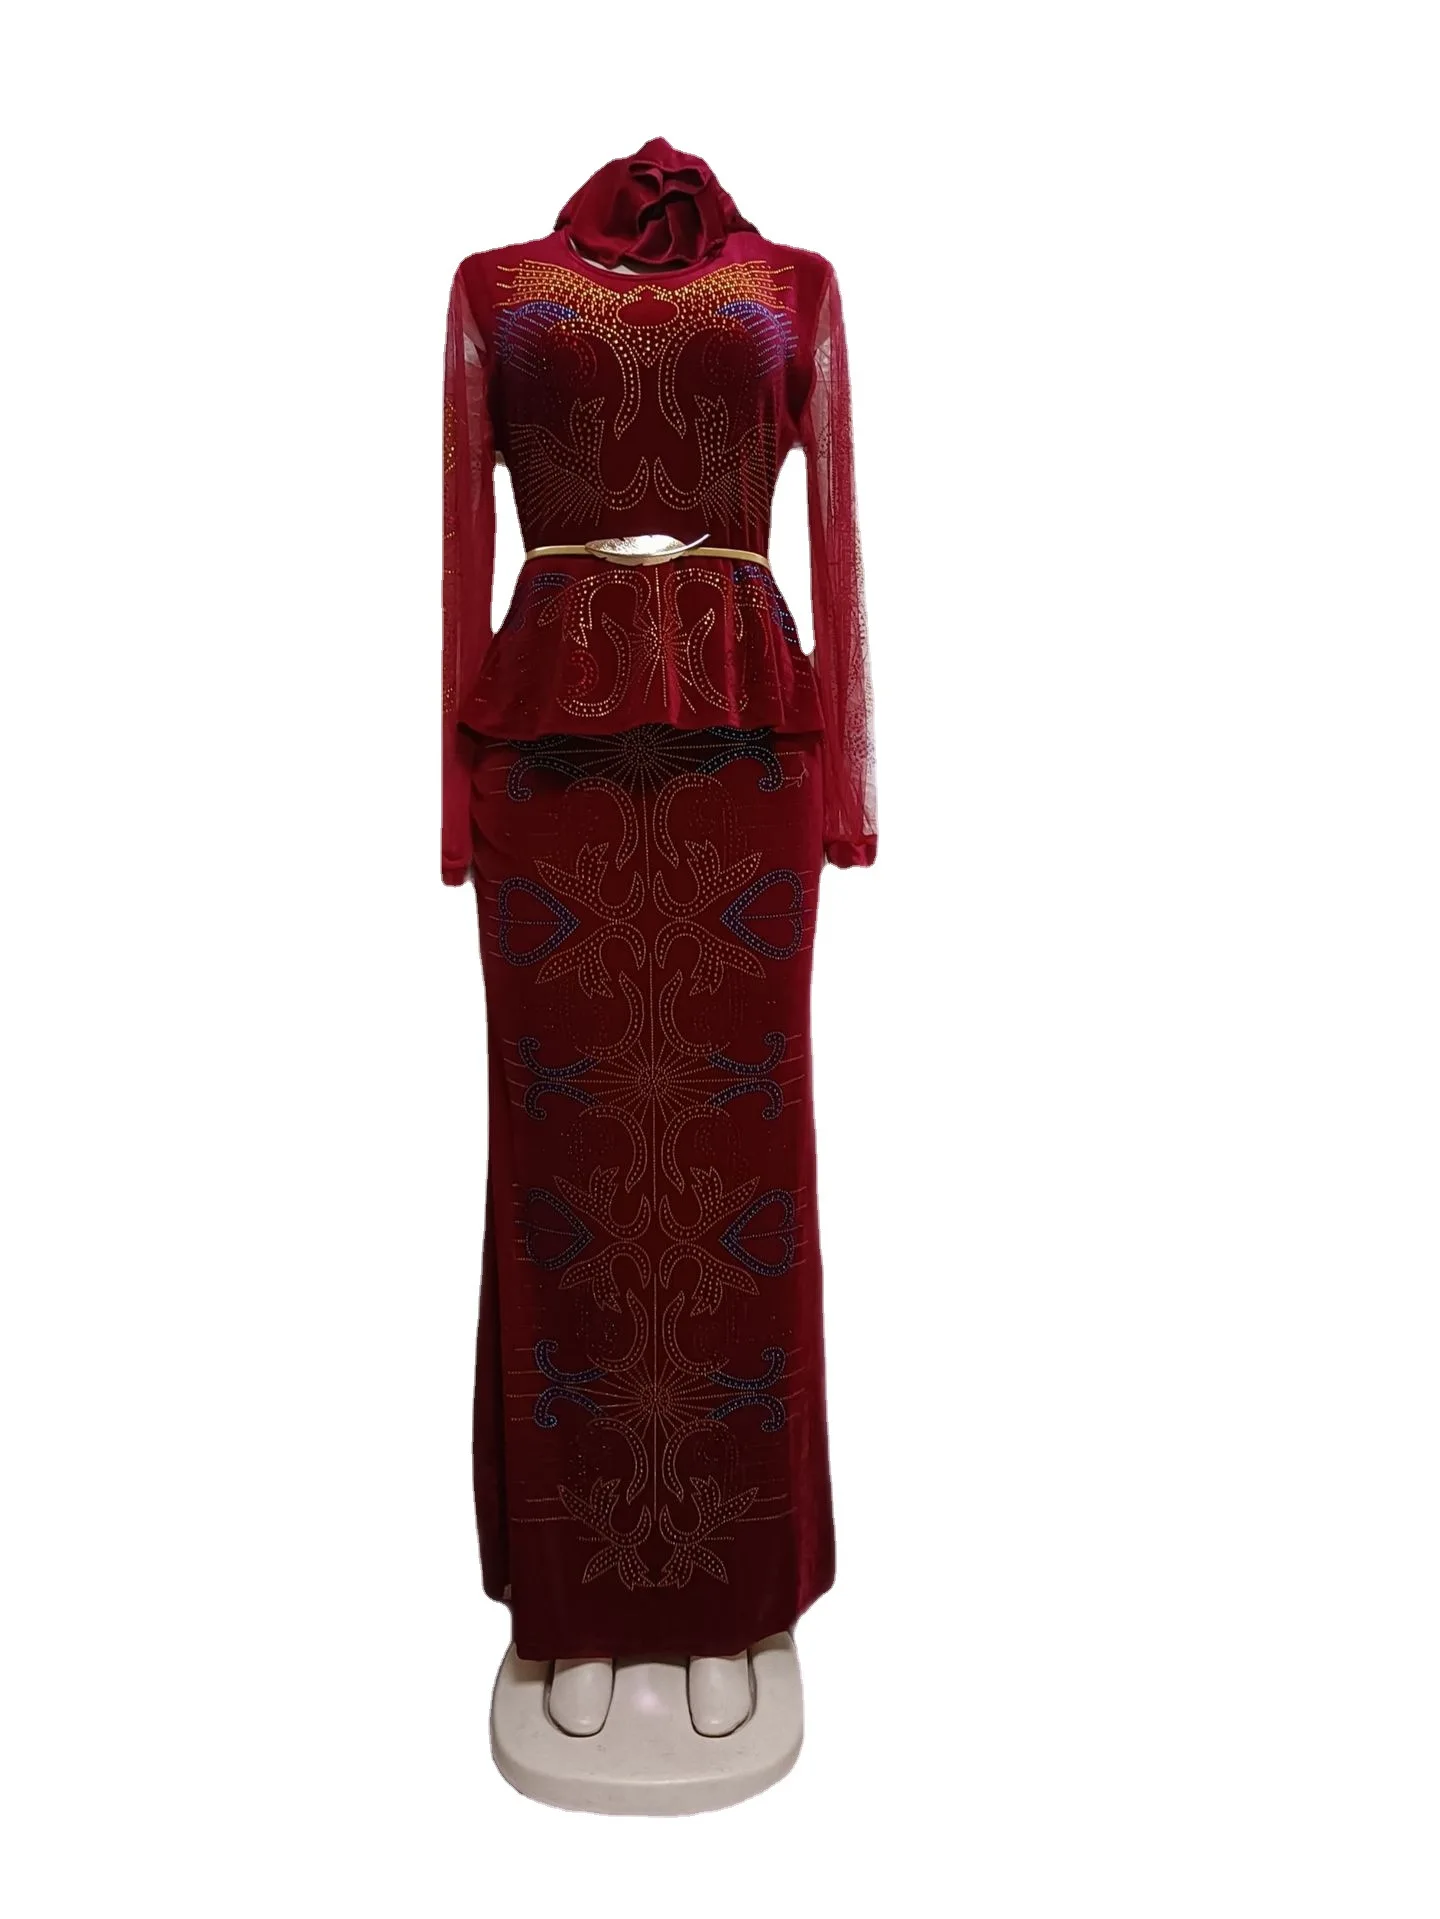 Velvet African Dresses for Women Summer Fashion Style African Women Long Sleeve O-neck Long Dress African Clothes with Headtie